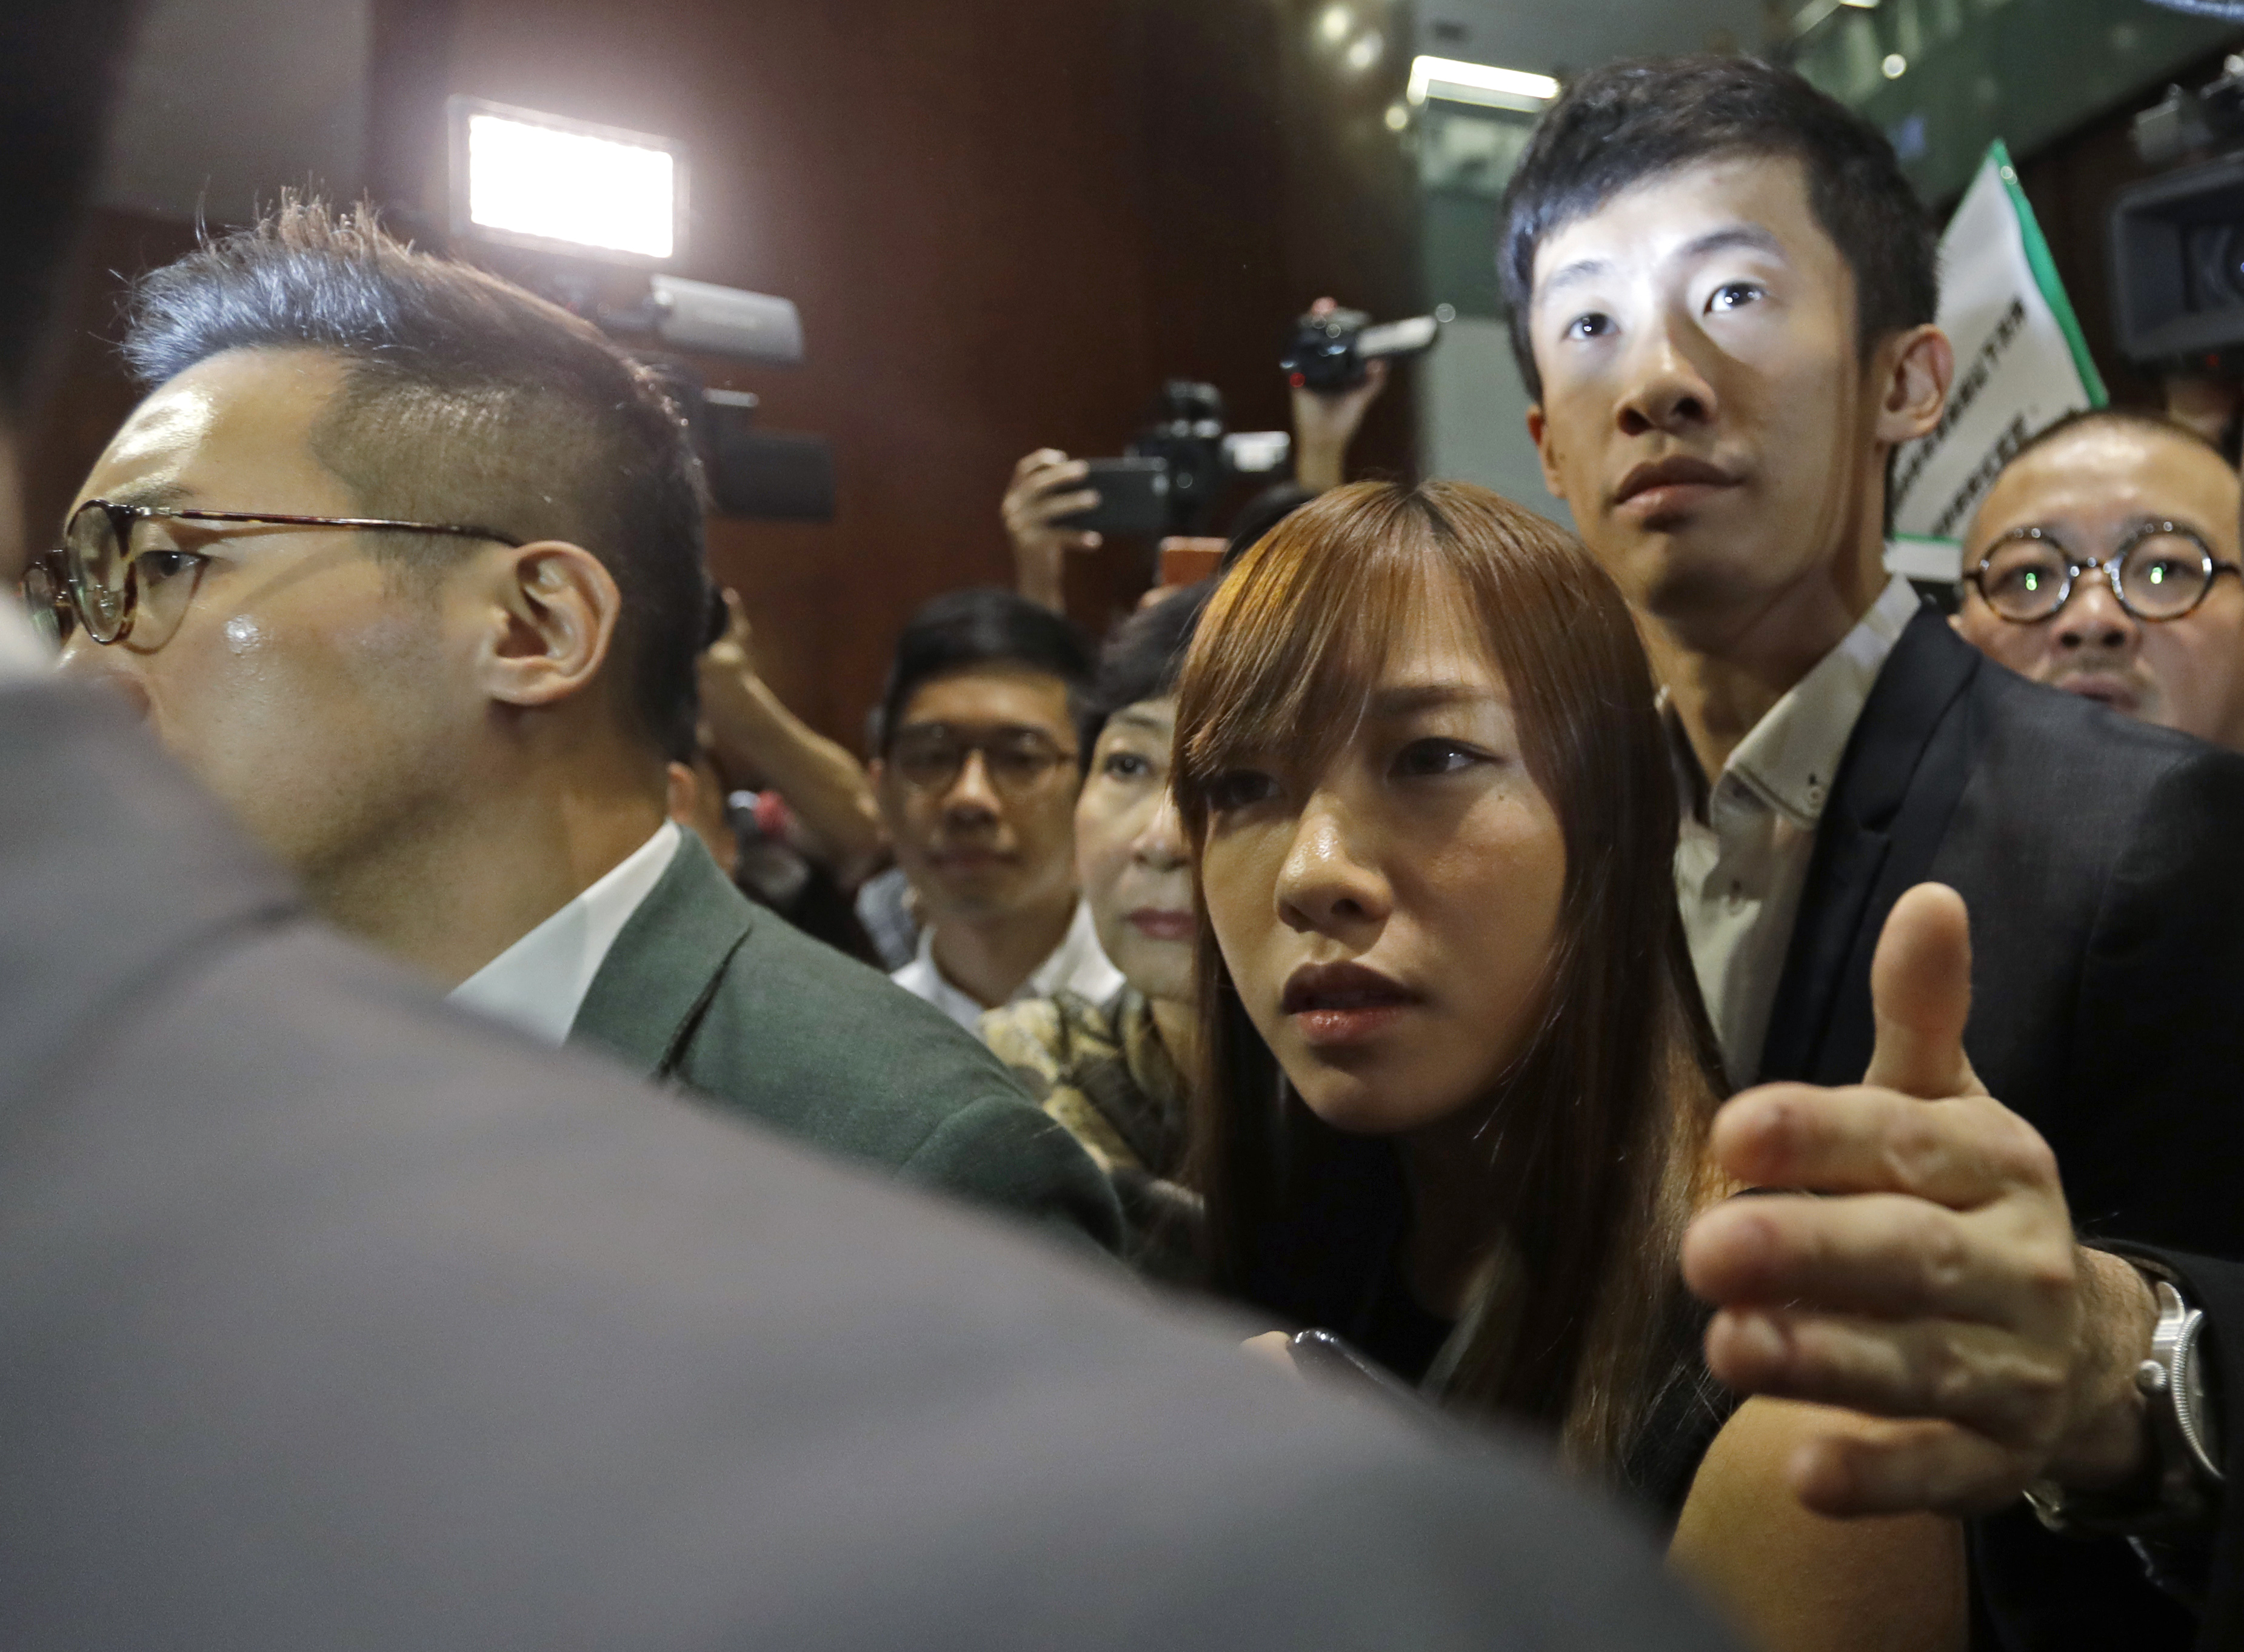 Hong Kong lawmakers Yau Wai-ching, center, and Sixtus Leung, right, are escorted by pan-democrats to enter the legislative chamber in Hong Kong on Oct. 26, 2016. More unruly scenes have erupted at Hong Kong’s Legislative Council as the two newly elected lawmakers defied an order barring them from retaking their oaths after being disqualified earlier for swearing allegiance to the "Hong Kong nation" (Kin Cheung—AP)